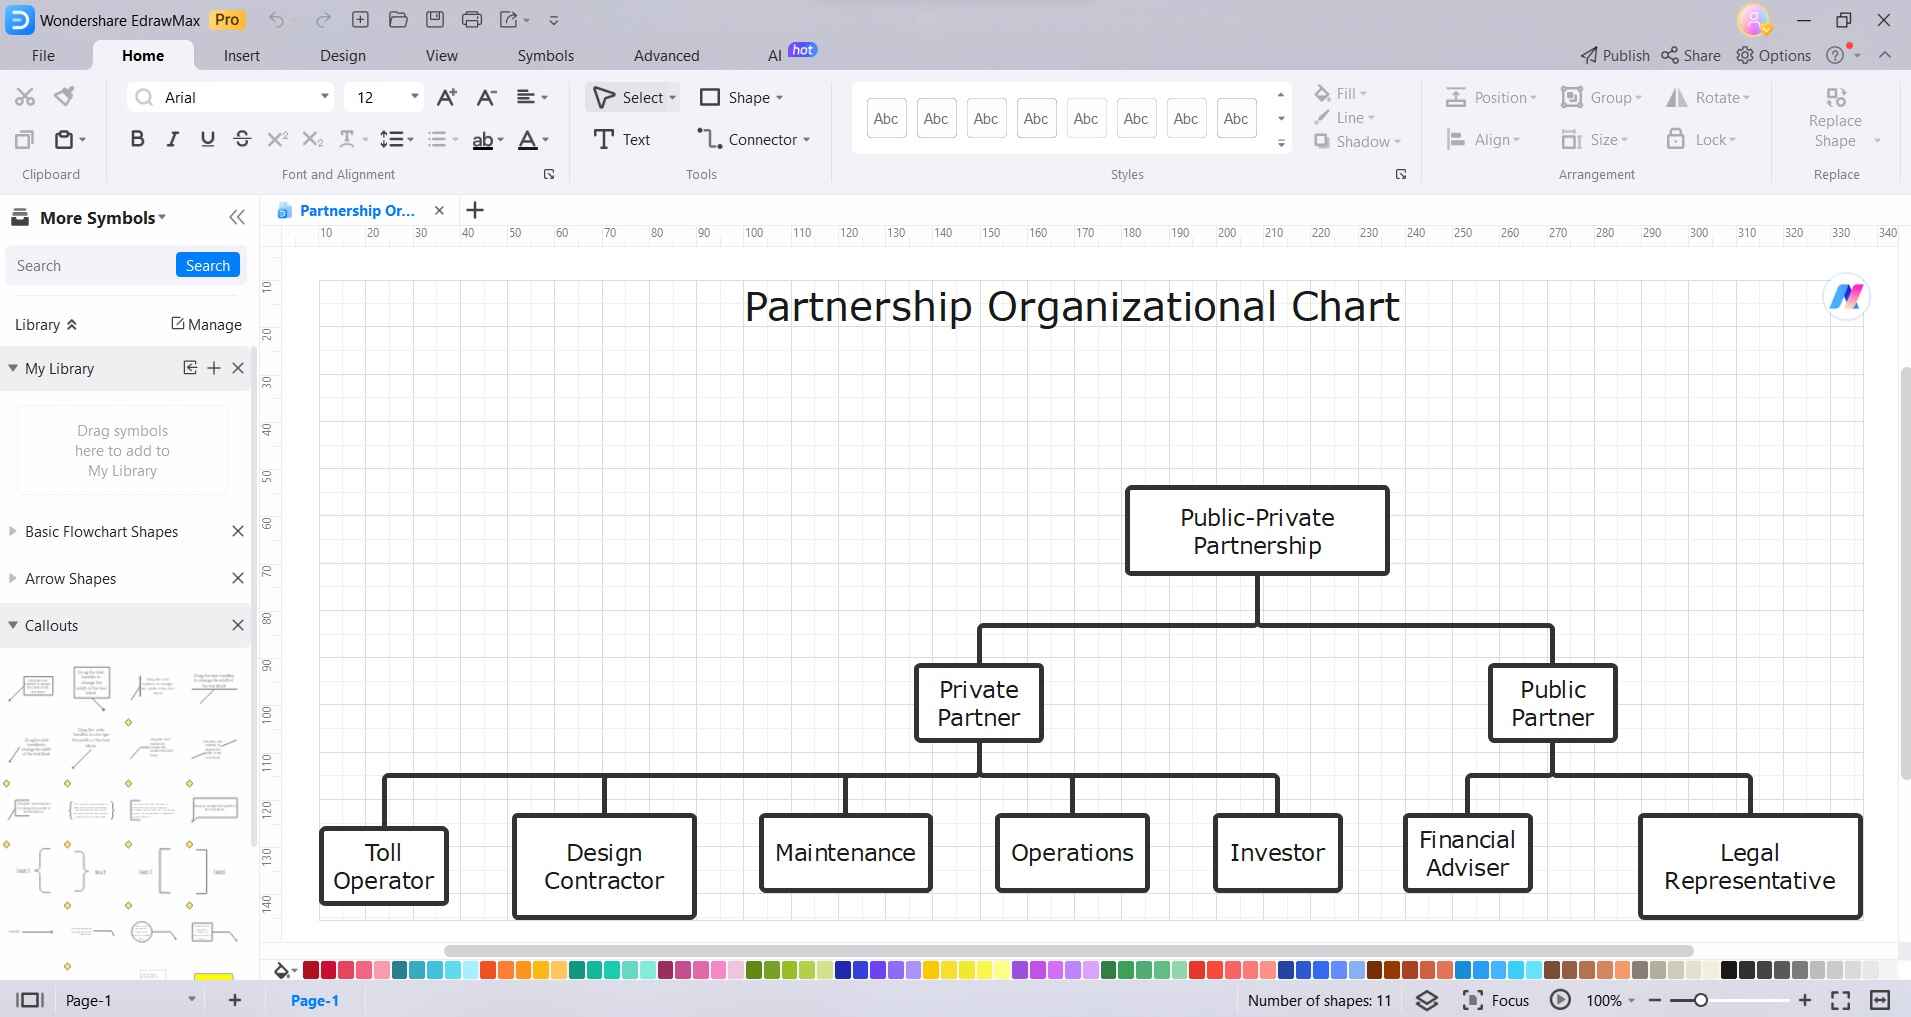 org chart for partnership business in edrawmax